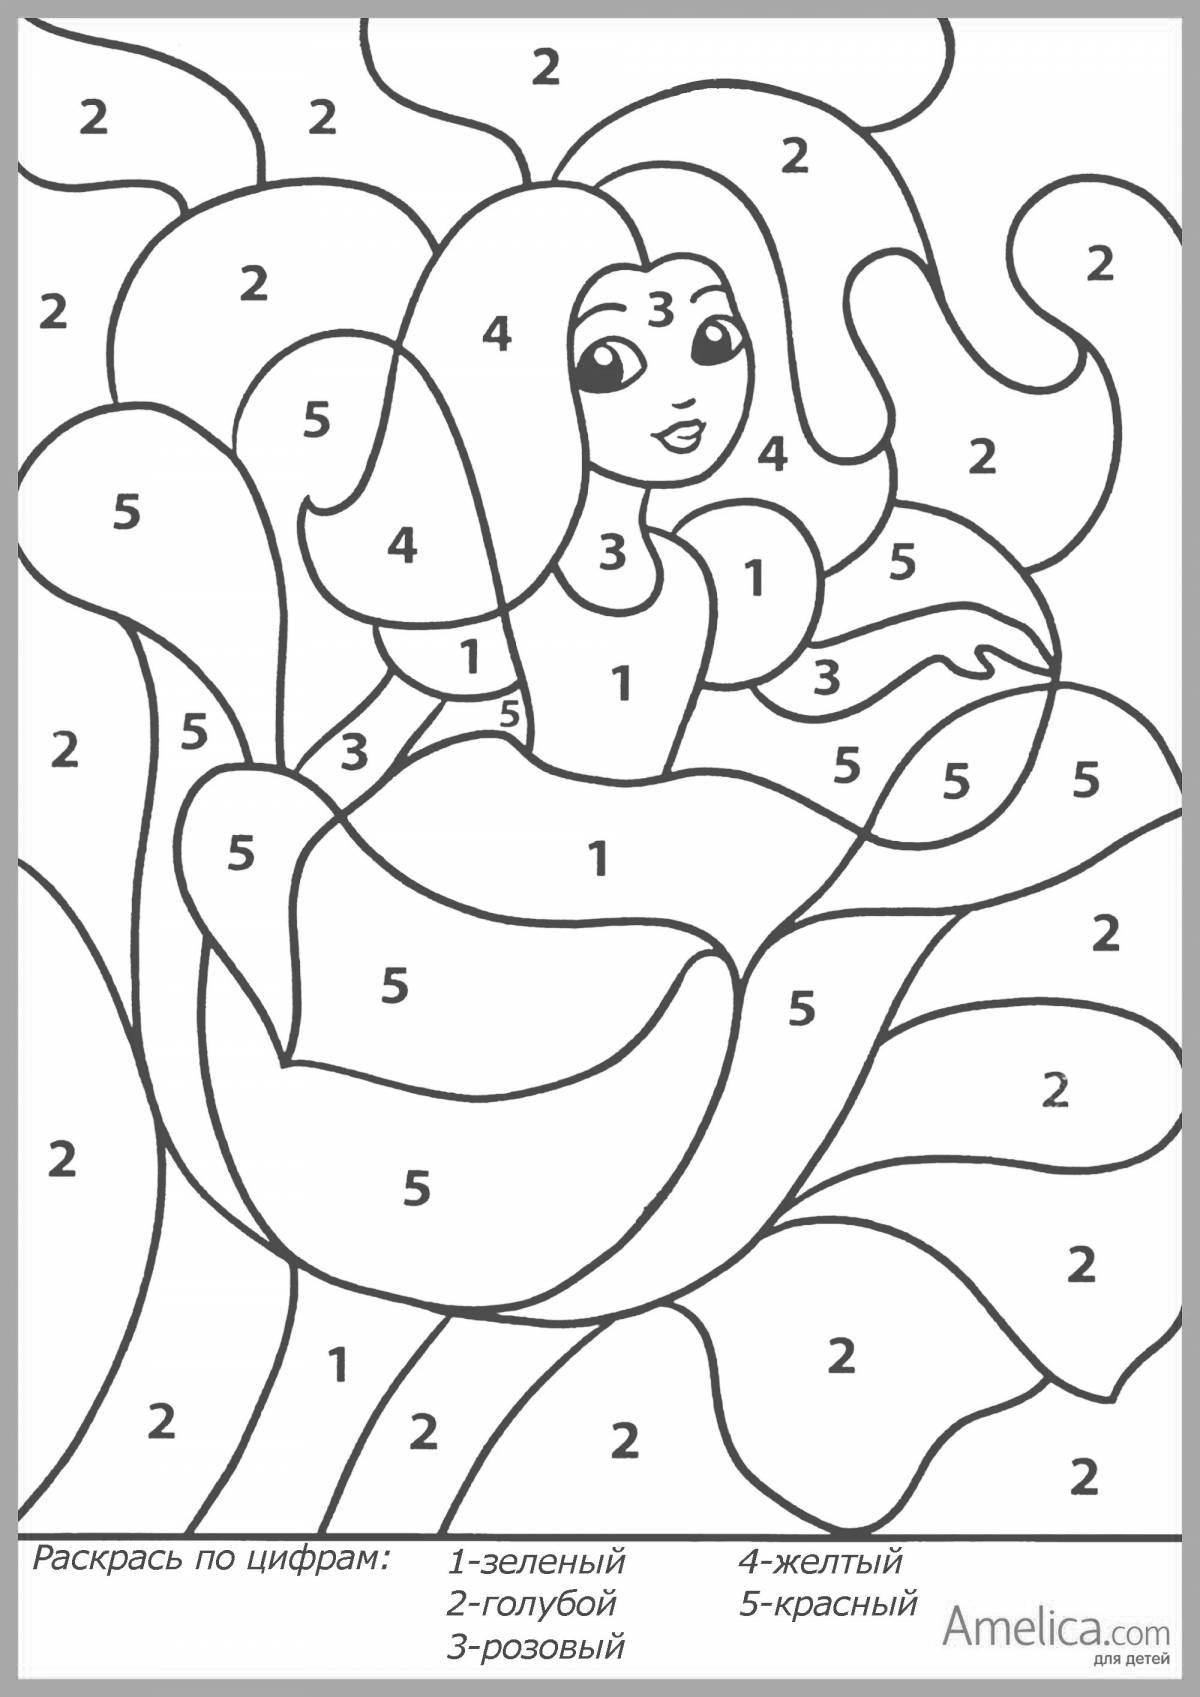 Intriguing coloring by numbers for kids 5-7 years old